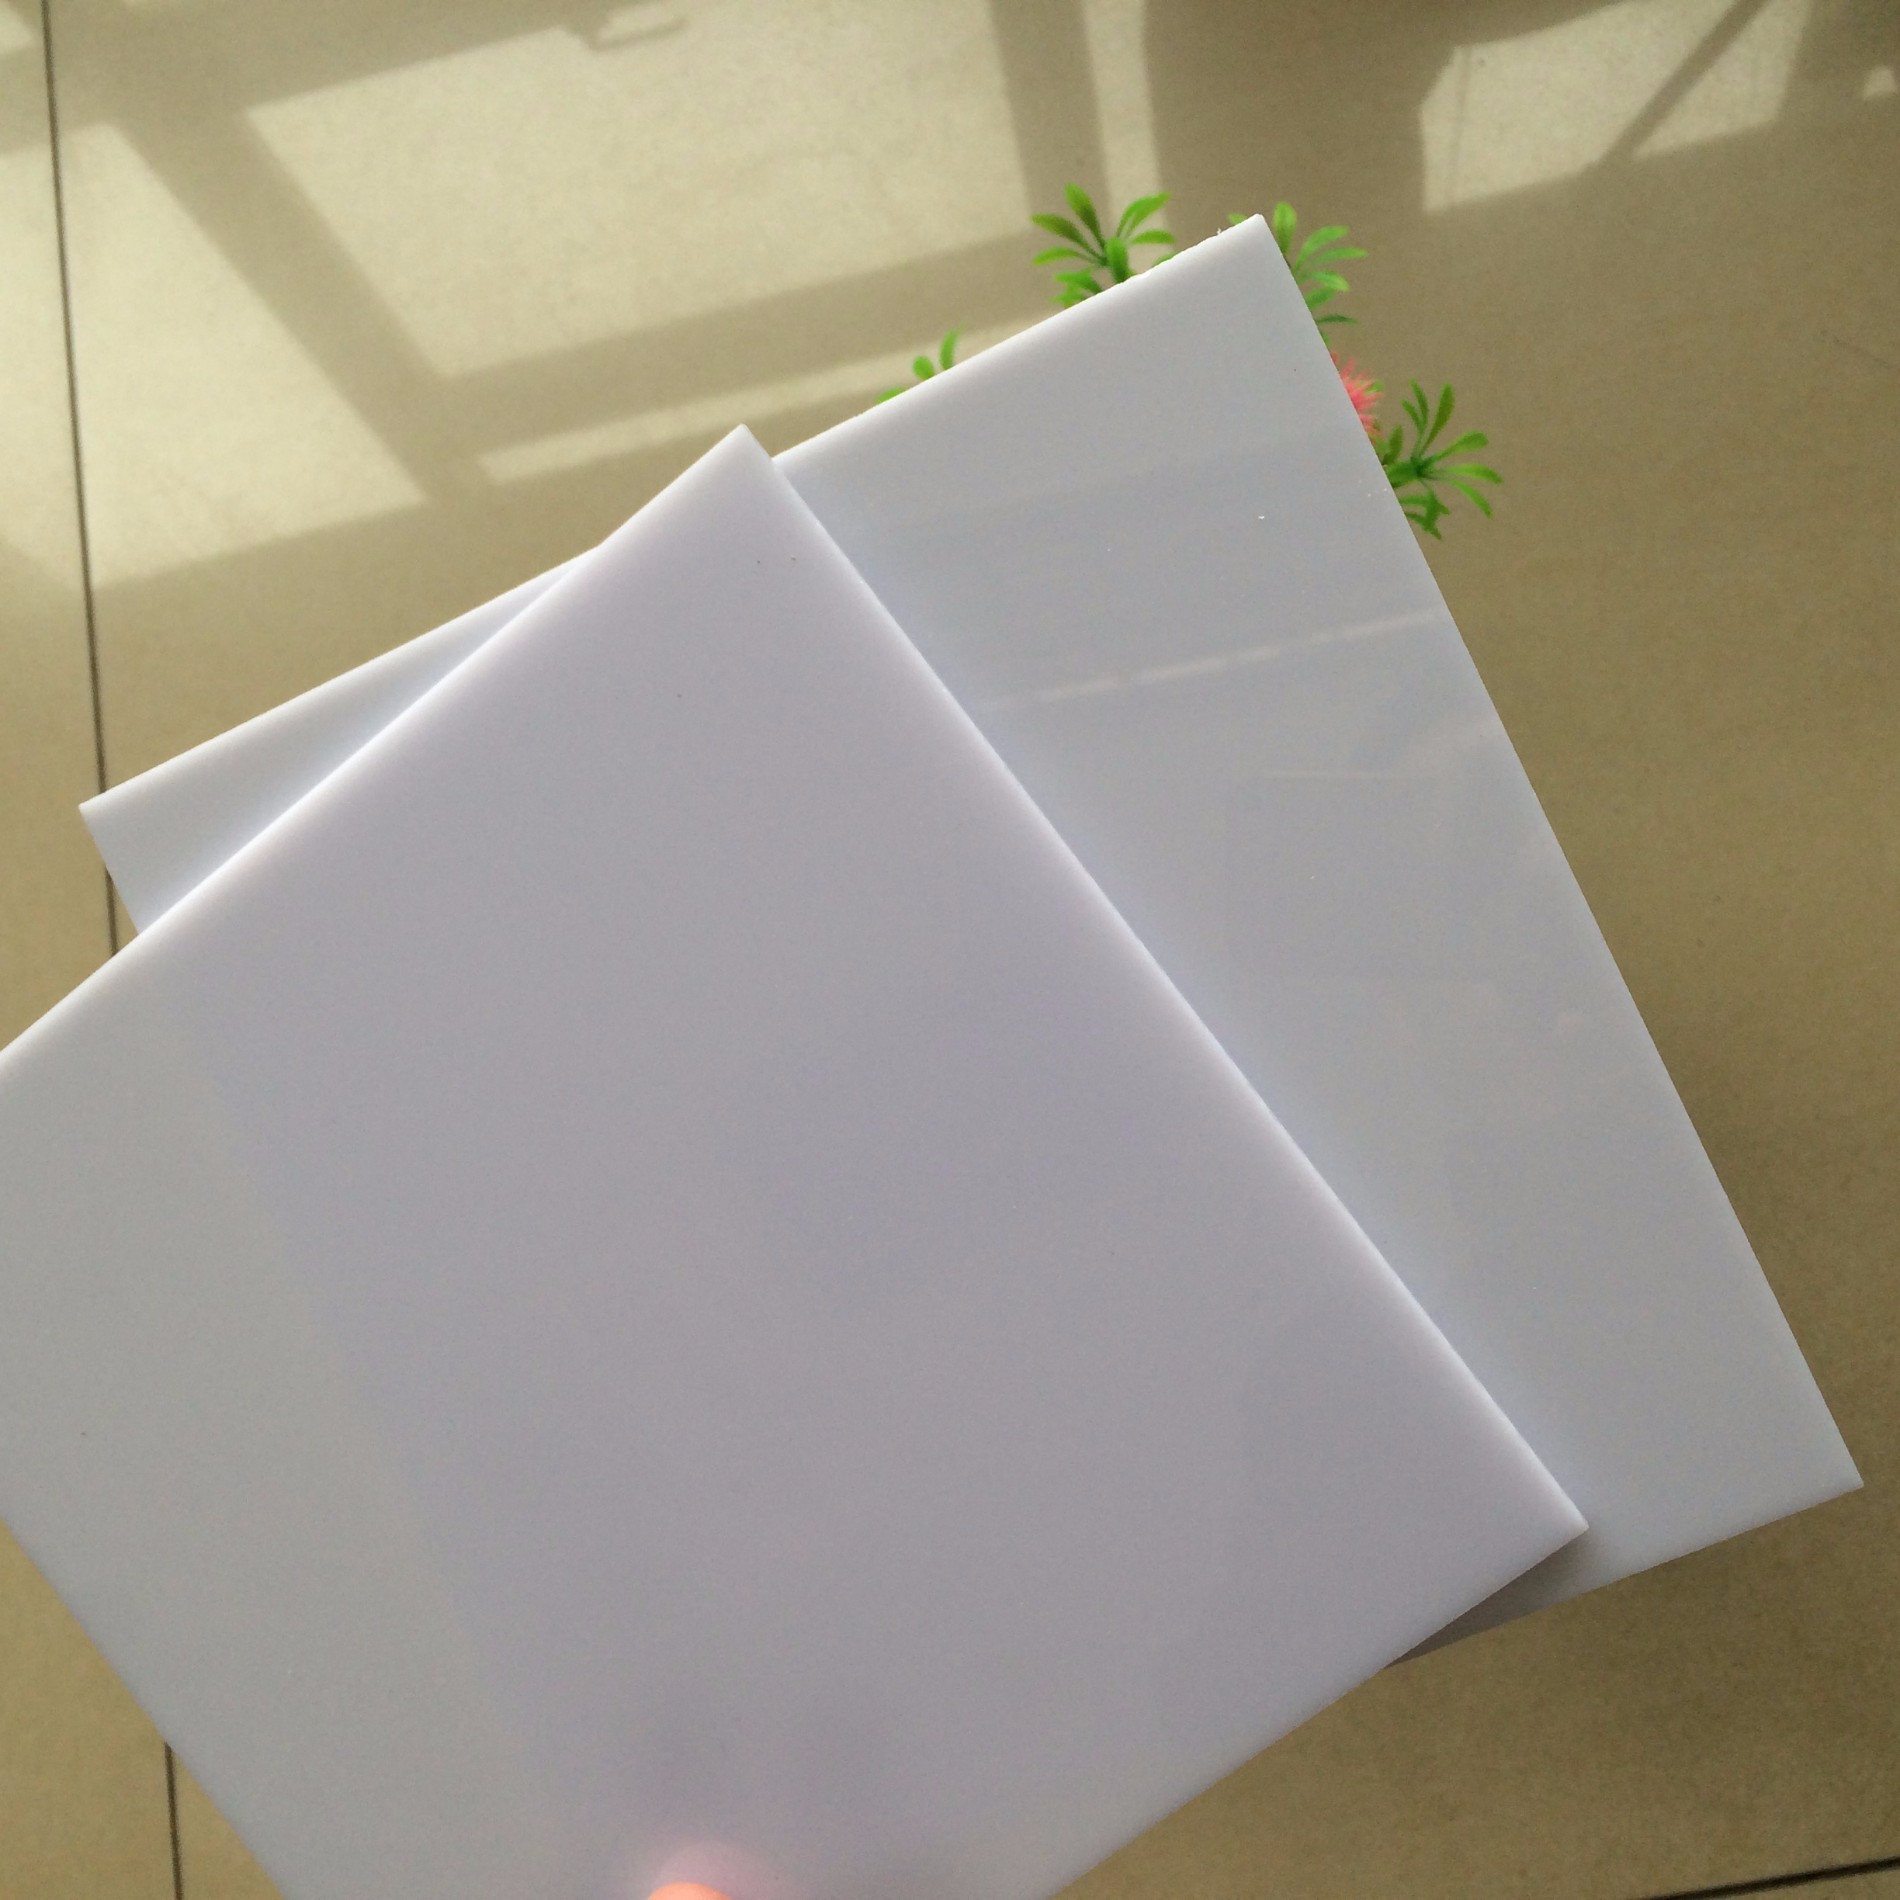 2-10mm thickness clear and white polystyrene sheet